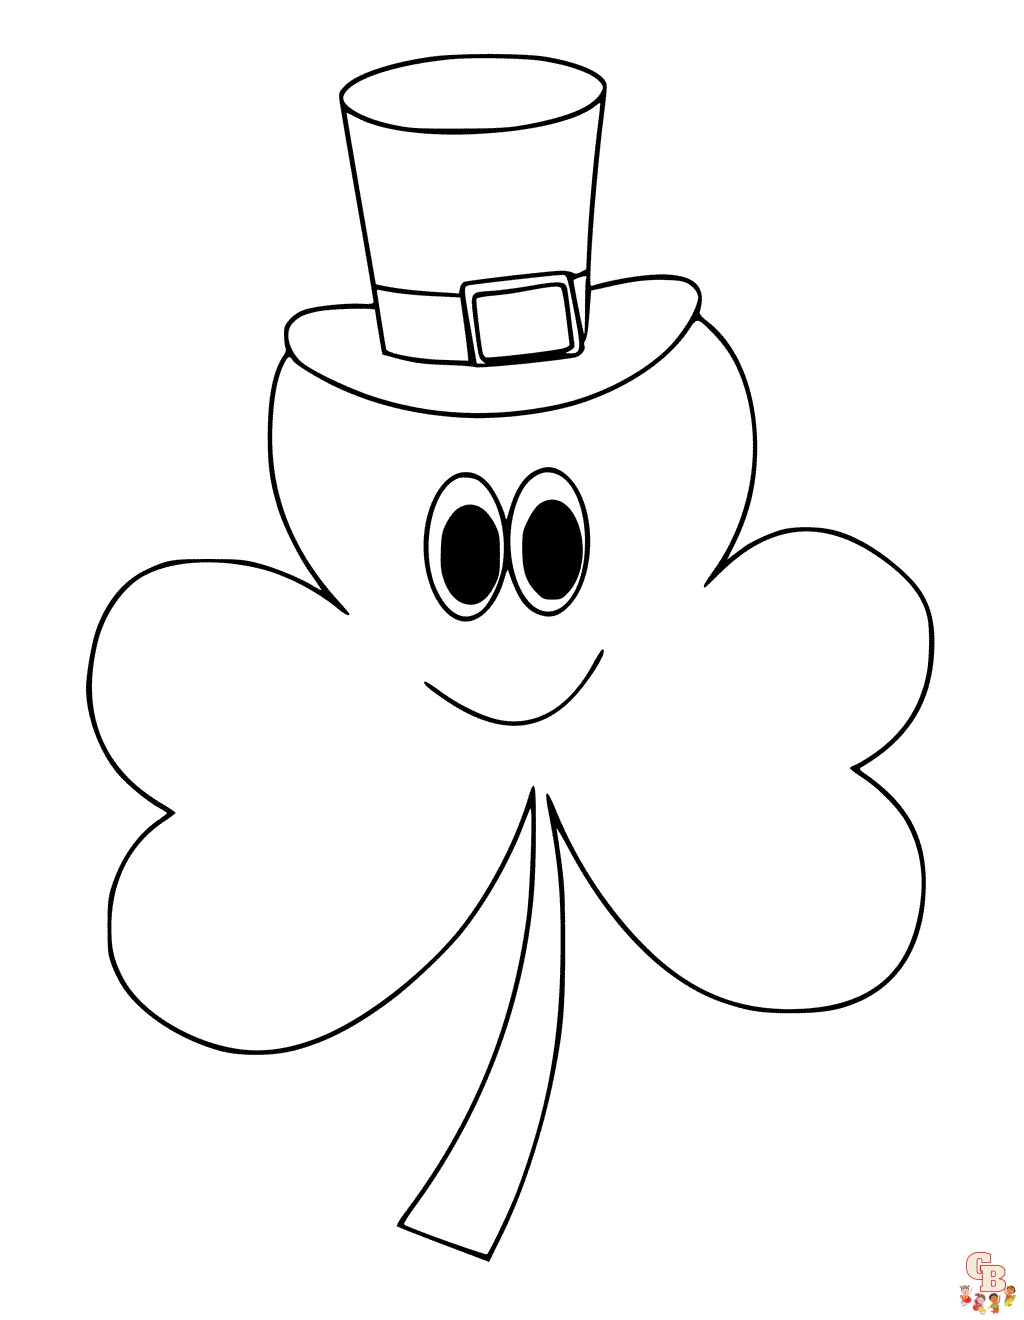 Shamrock Coloring Pages02